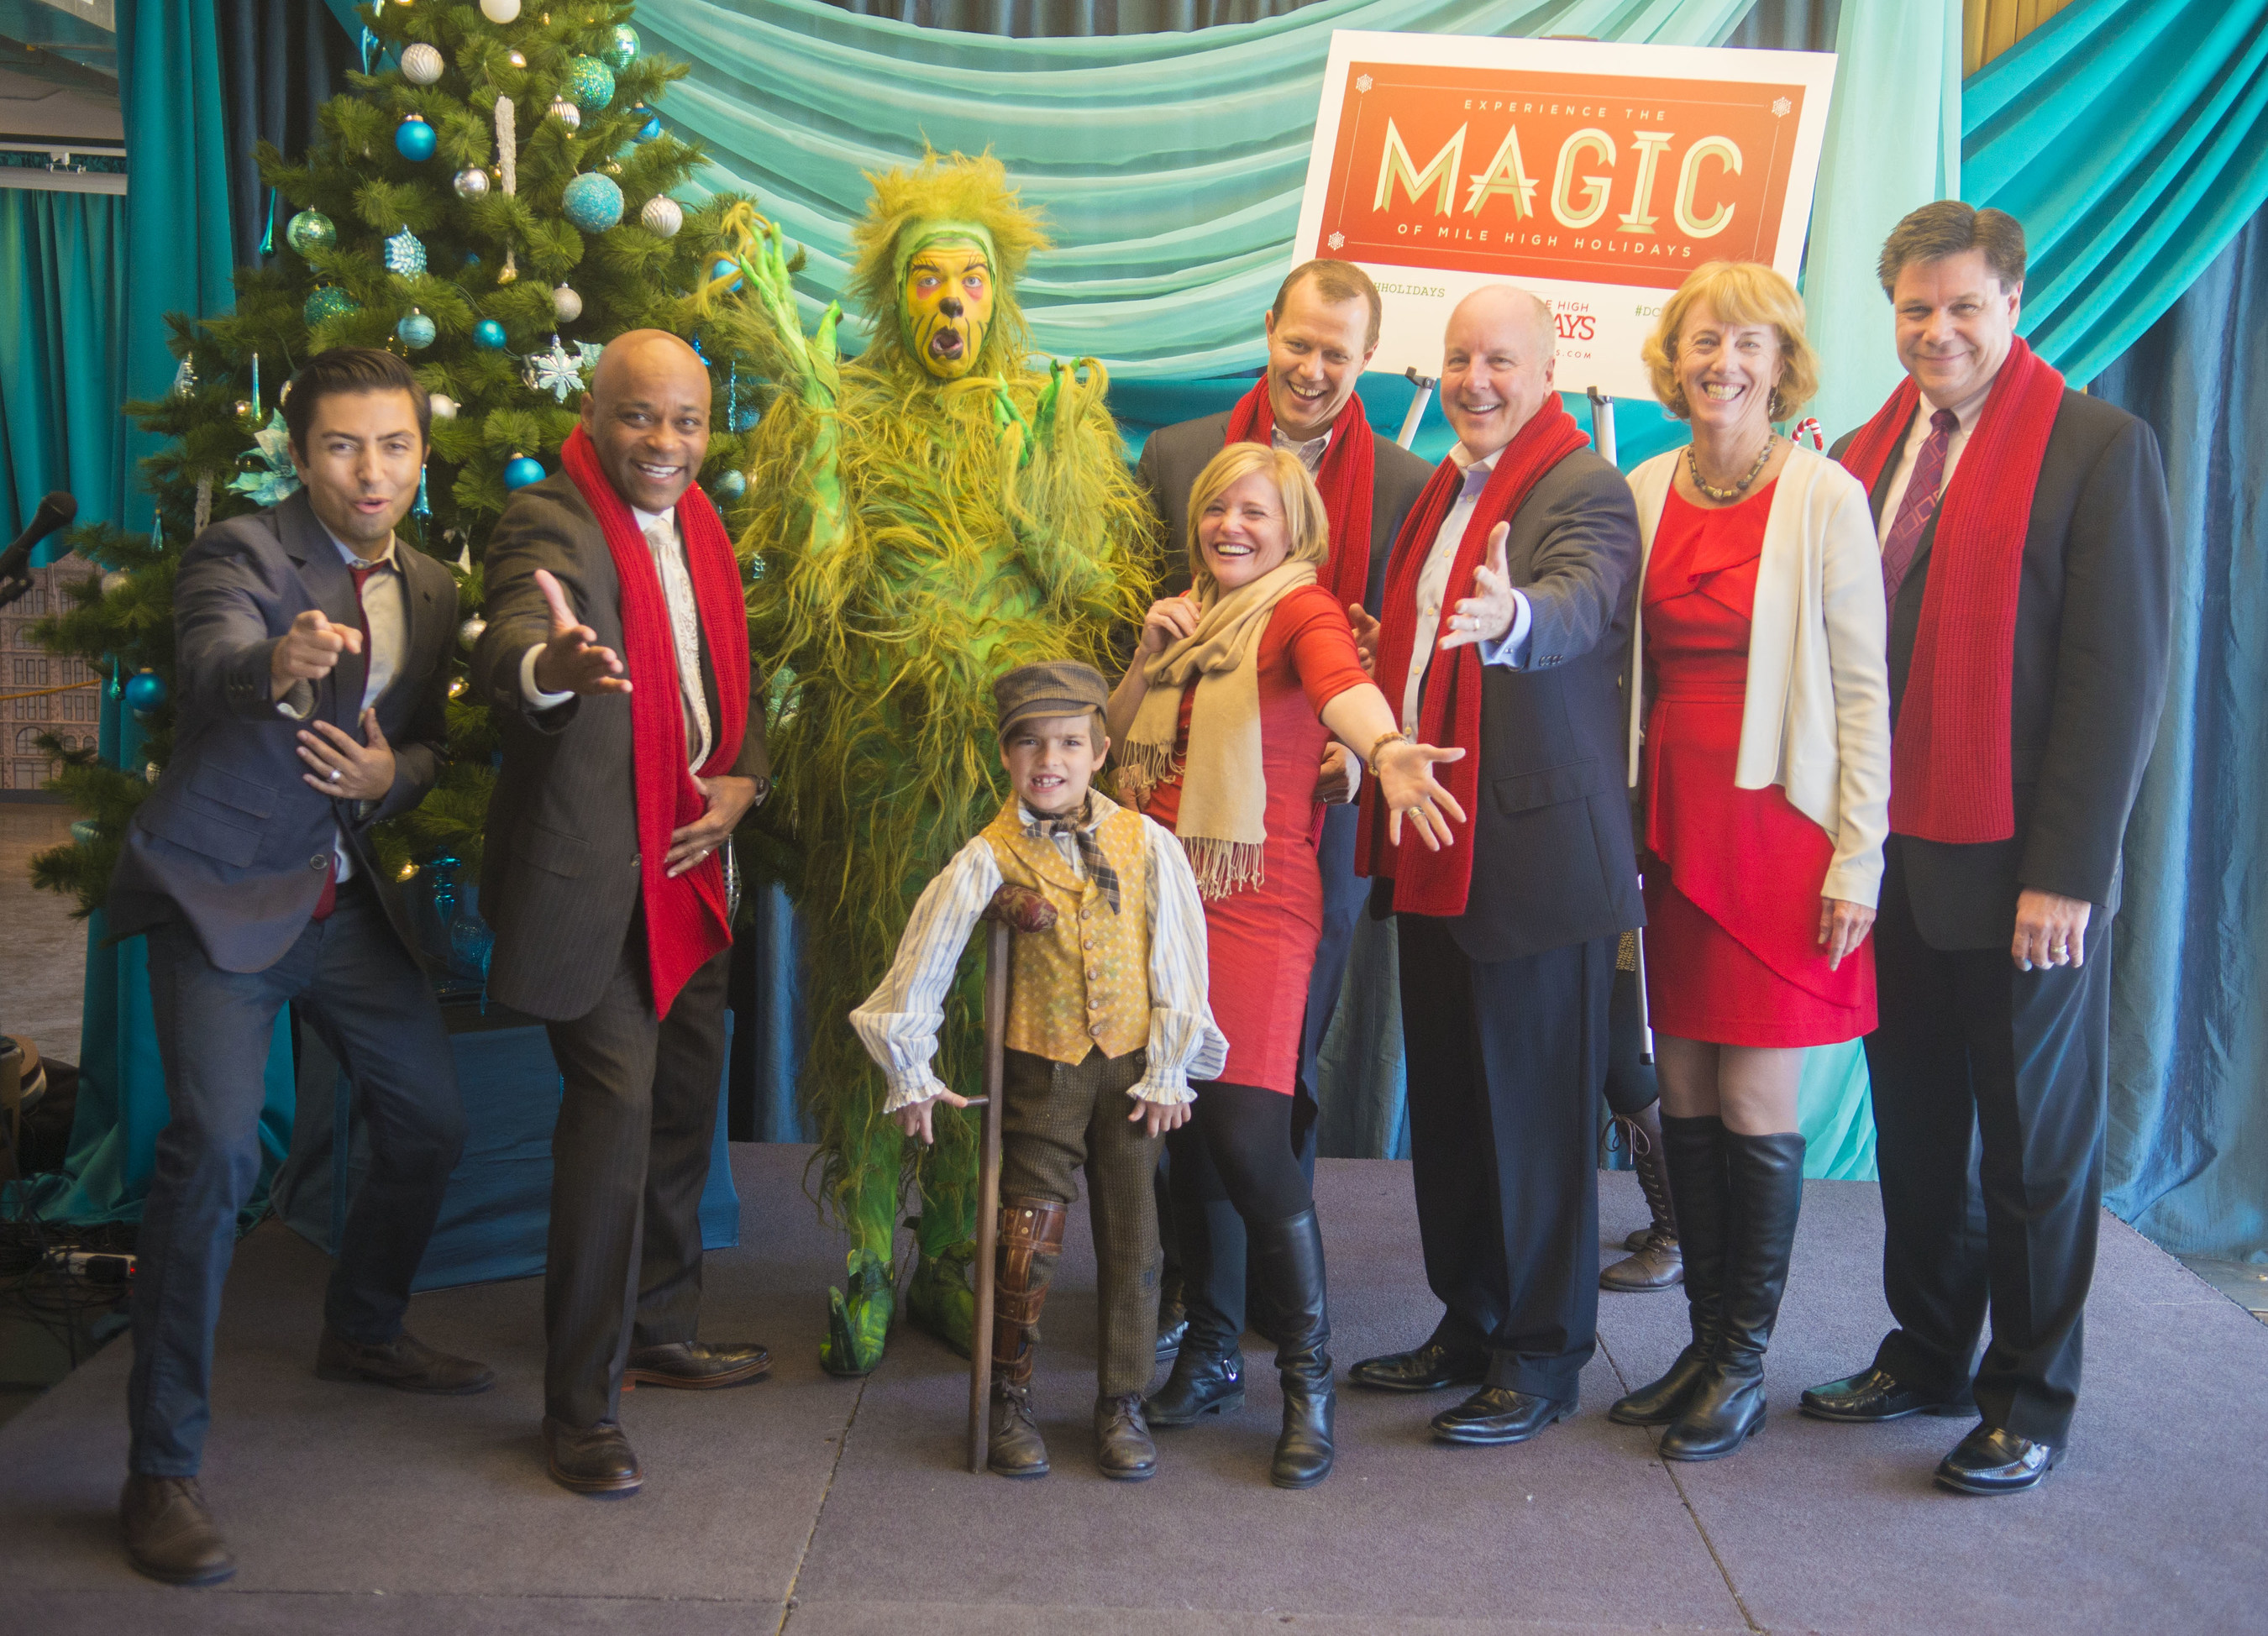 Mile High Holidays 2014 Press Conference: (From Left to Right) Shaun Taylor-Corbett (Frankie Valli, Jersey Boys), Mayor Michael B. Hancock, The Grinch (How The Grinch Stole Christmas! The Musical), Tiny Tim (A Christmas Carol), Tami Door (Downtown Denver Partnership), Dave Dixon (Cherry Creek Shopping Center), Richard Scharf (VISIT DENVER), Julie Underdahl (Cherry Creek North) and Jeff Hovorka (DCPA) at the Mile High Holidays 2014 Press Conference. Image courtesy of Evan Semon.